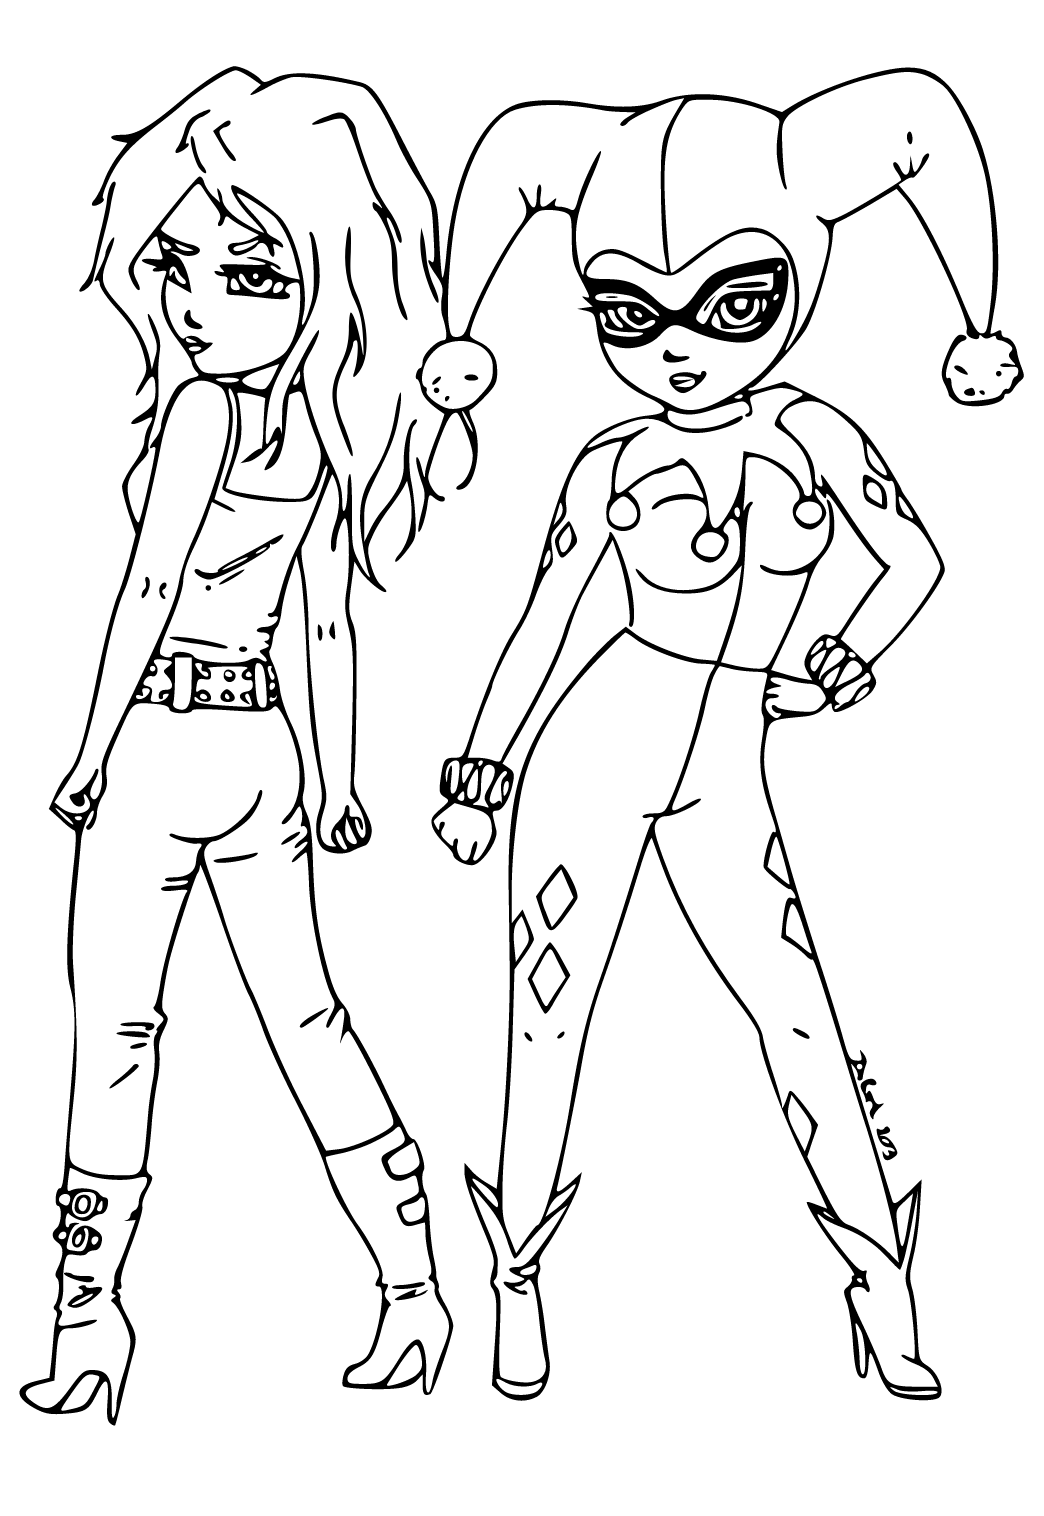 Free printable harley quinn mask coloring page for adults and kids